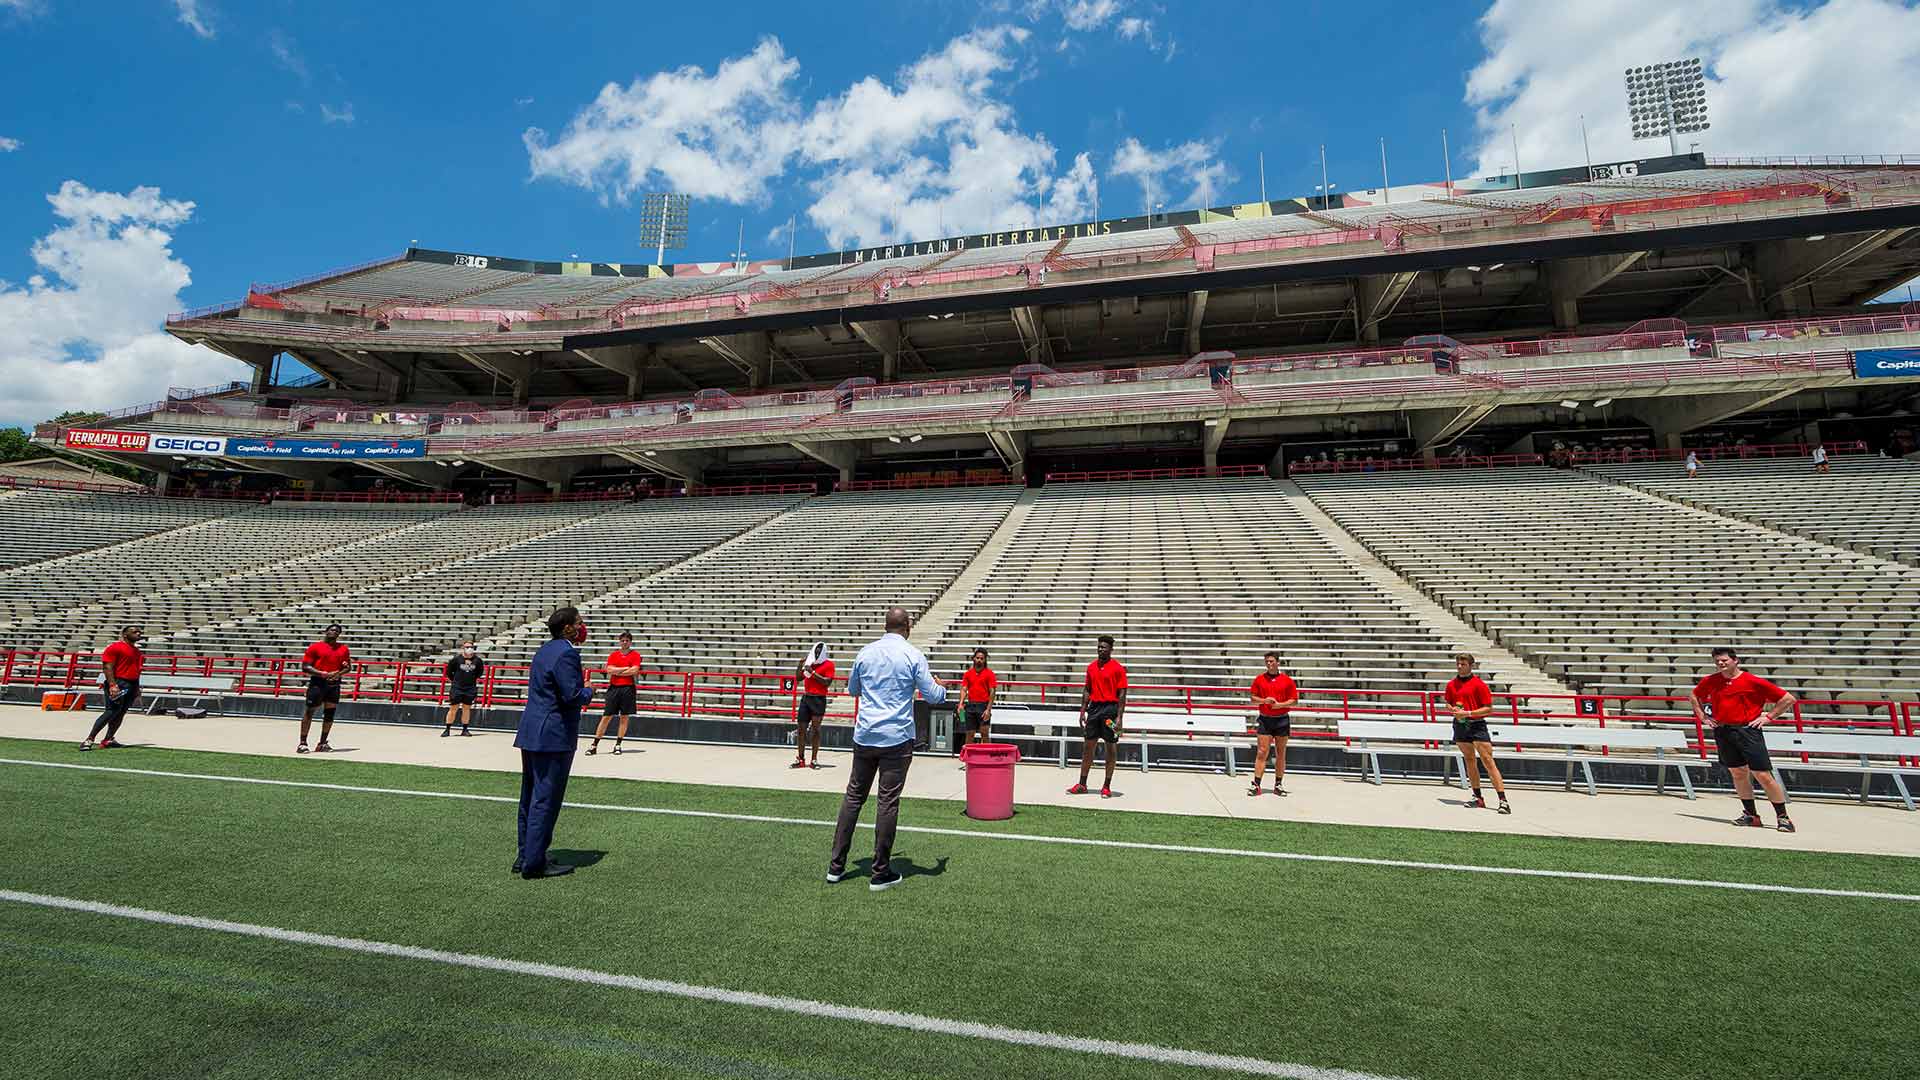 Pines first day with FB team at Maryland stadium